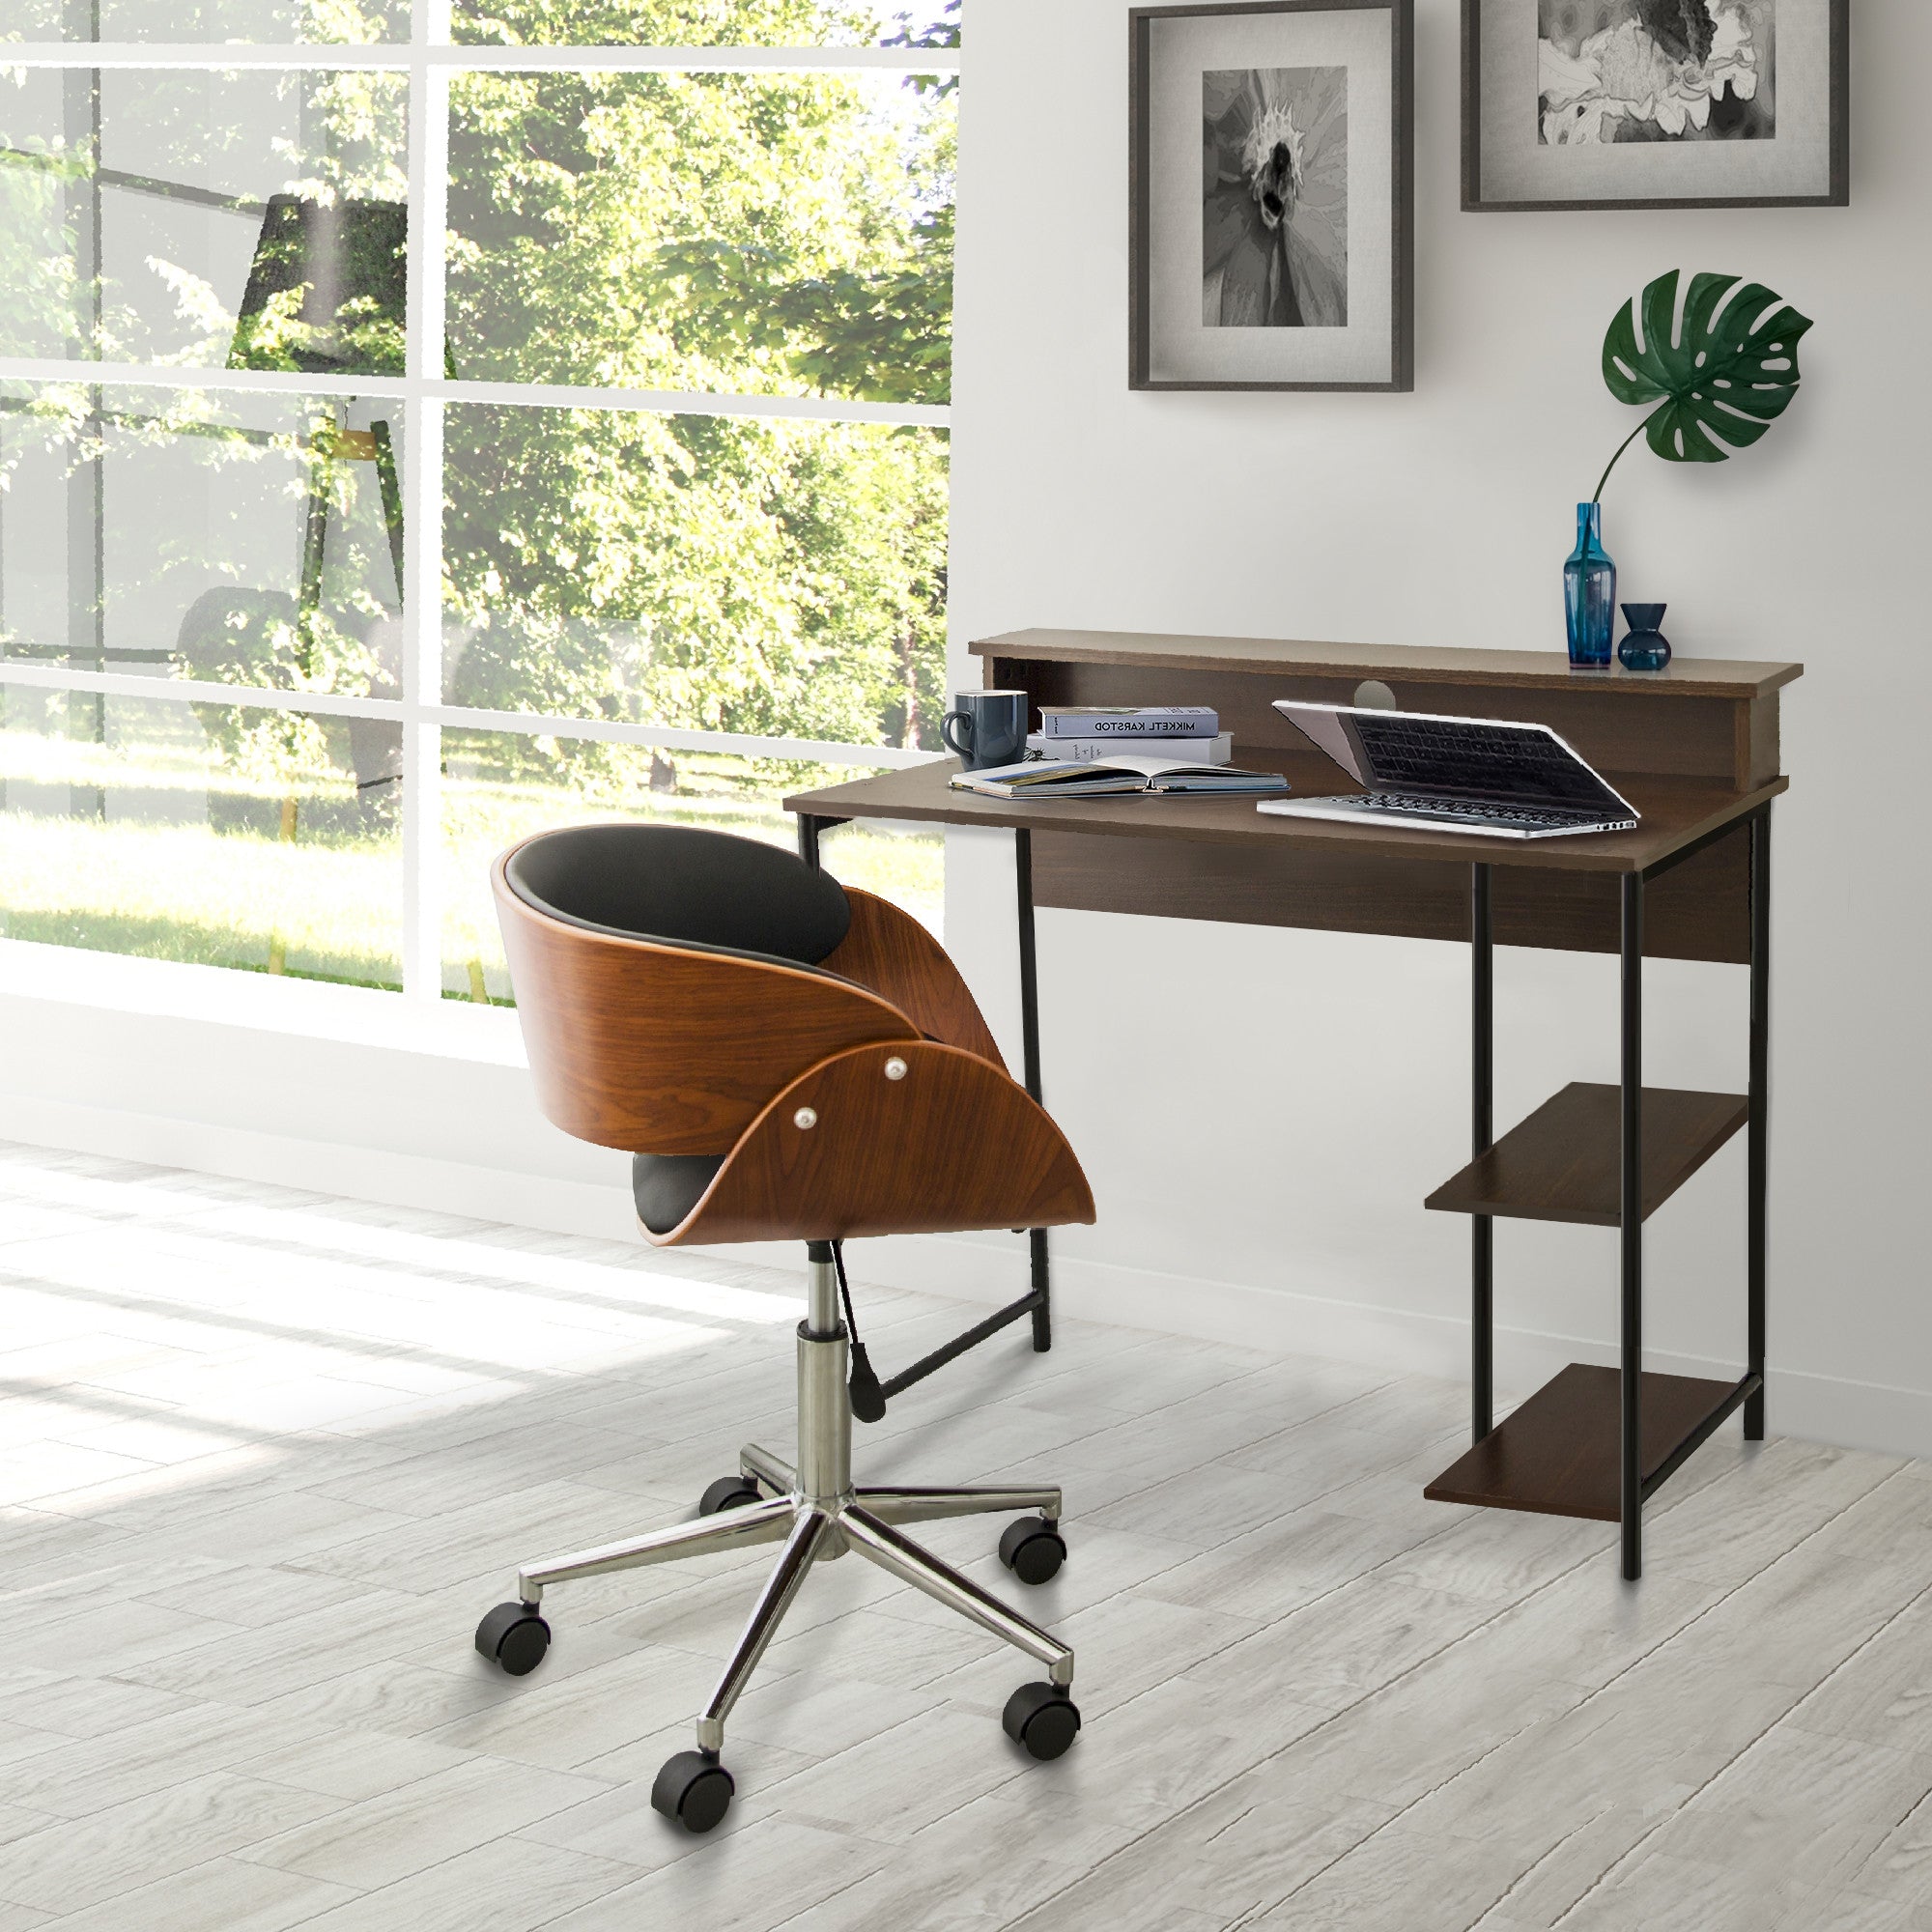 Teamson Home 35" Wooden Home Office Computer Desk with Metal Base and Storage, Natural/Black